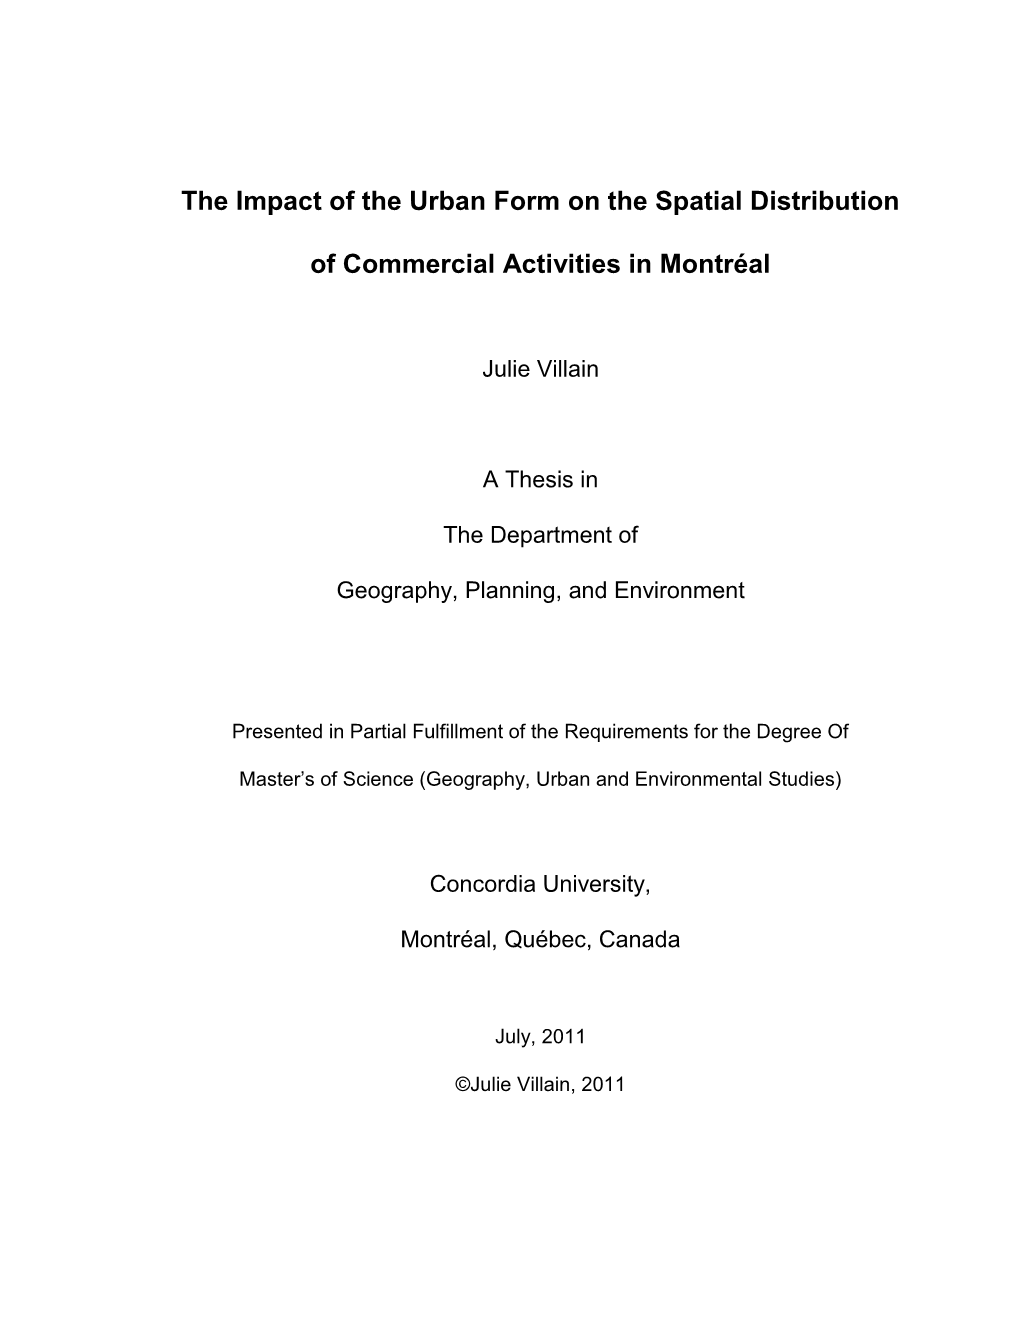 The Impact of the Urban Form on the Spatial Distribution of Commercial